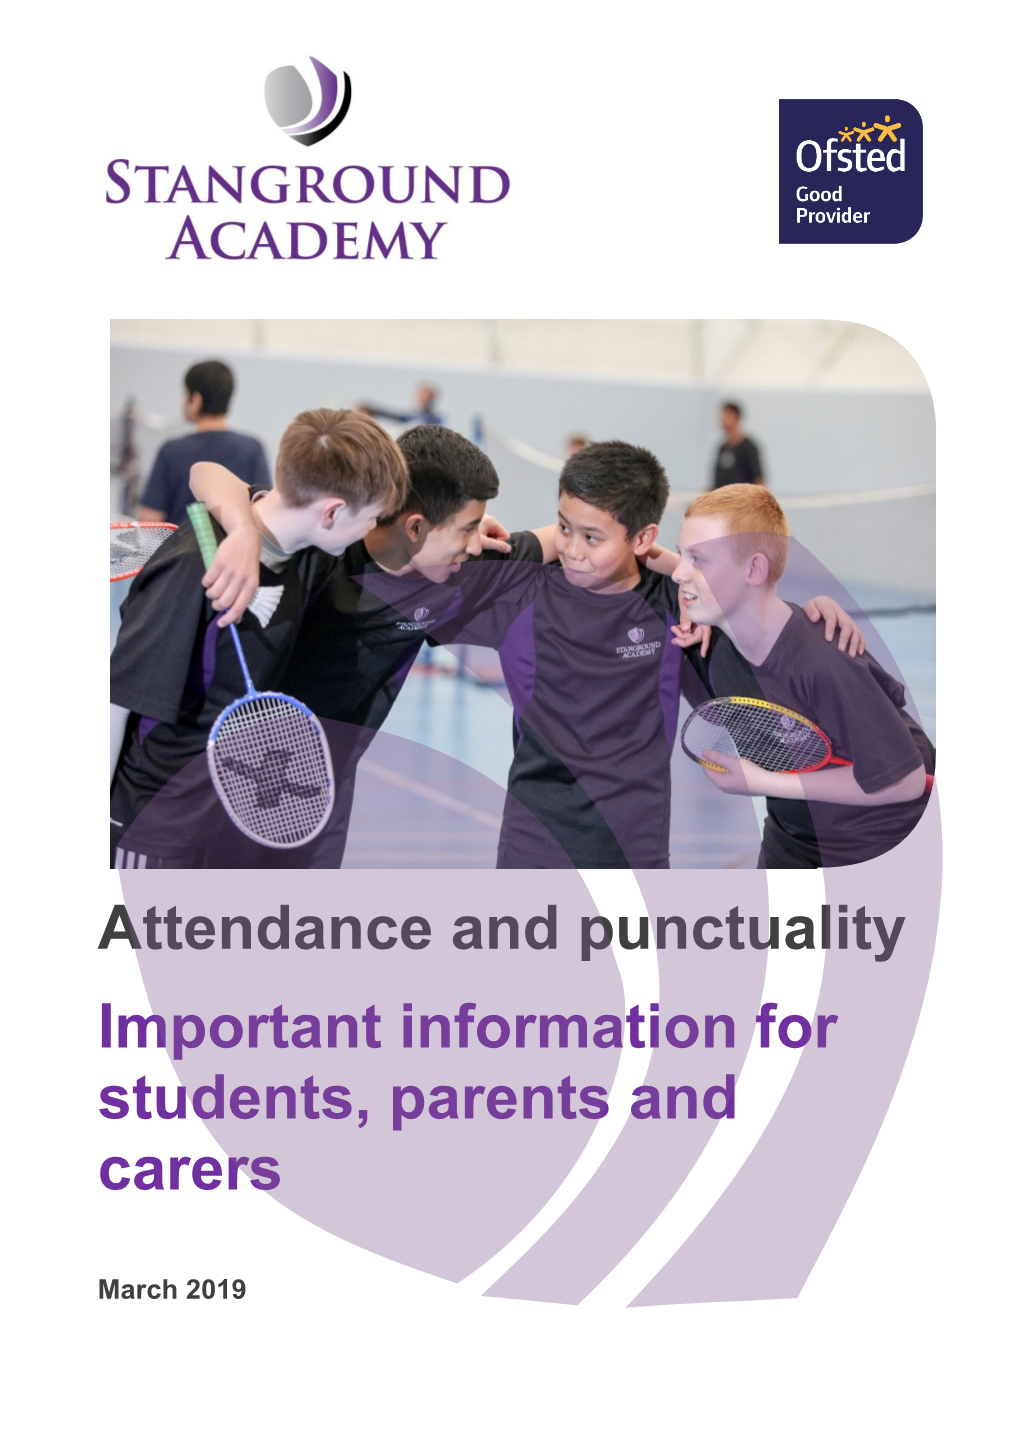 Important Information for Students, Parents and Carers